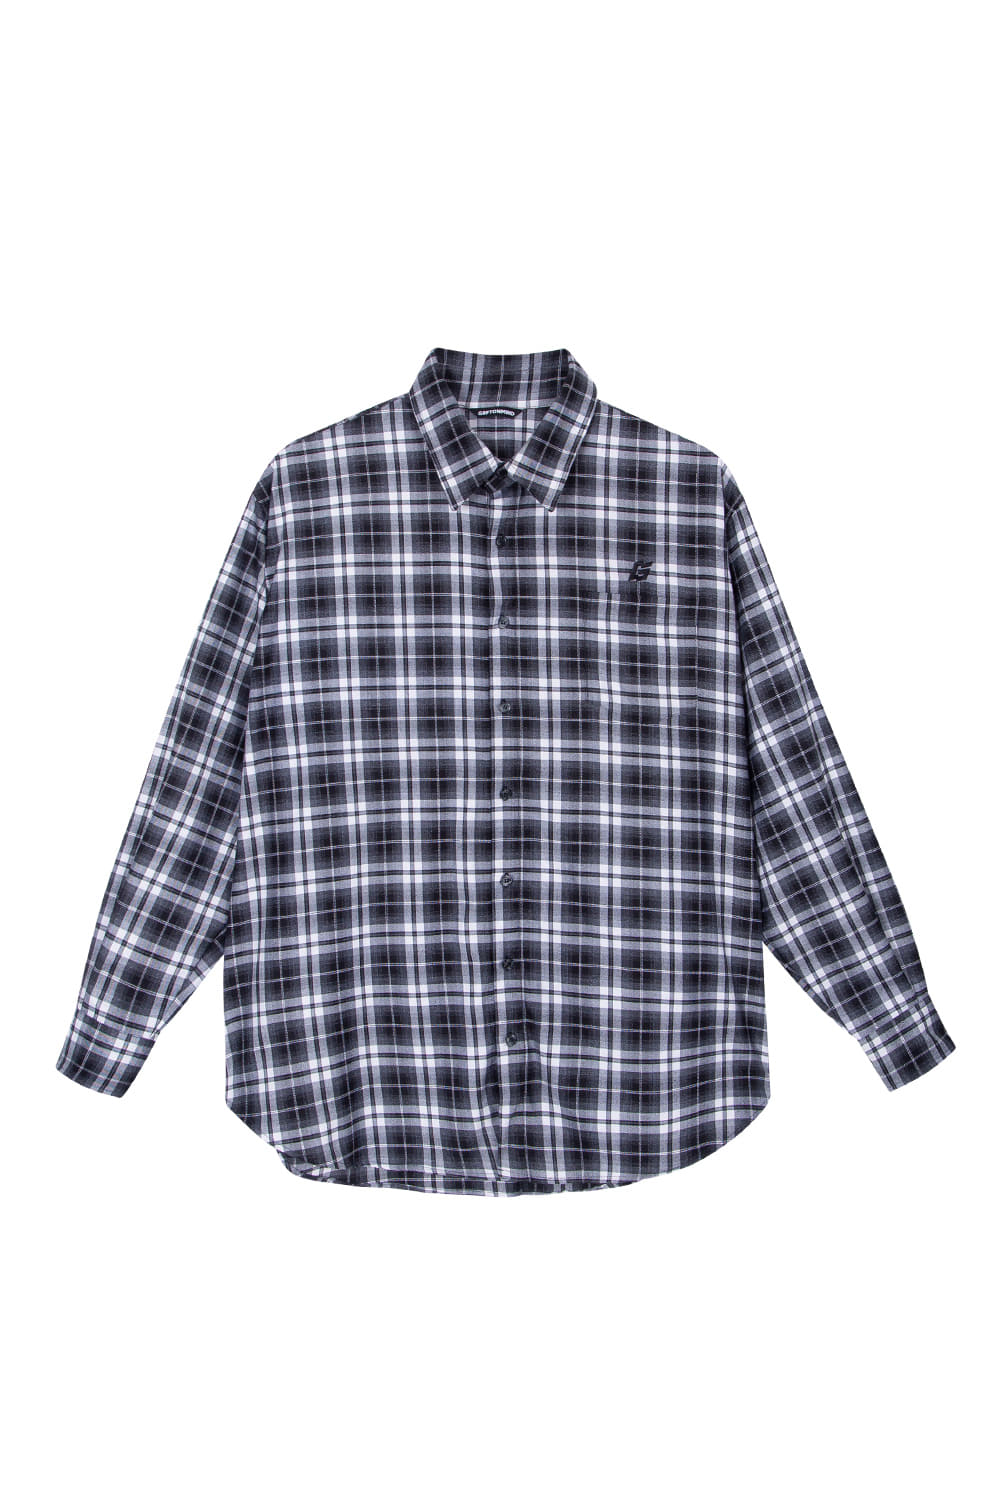 [SALE] EMBROIDERED LOGO CHECKED FLANNEL SHIRTSGRAFFITIONMIND